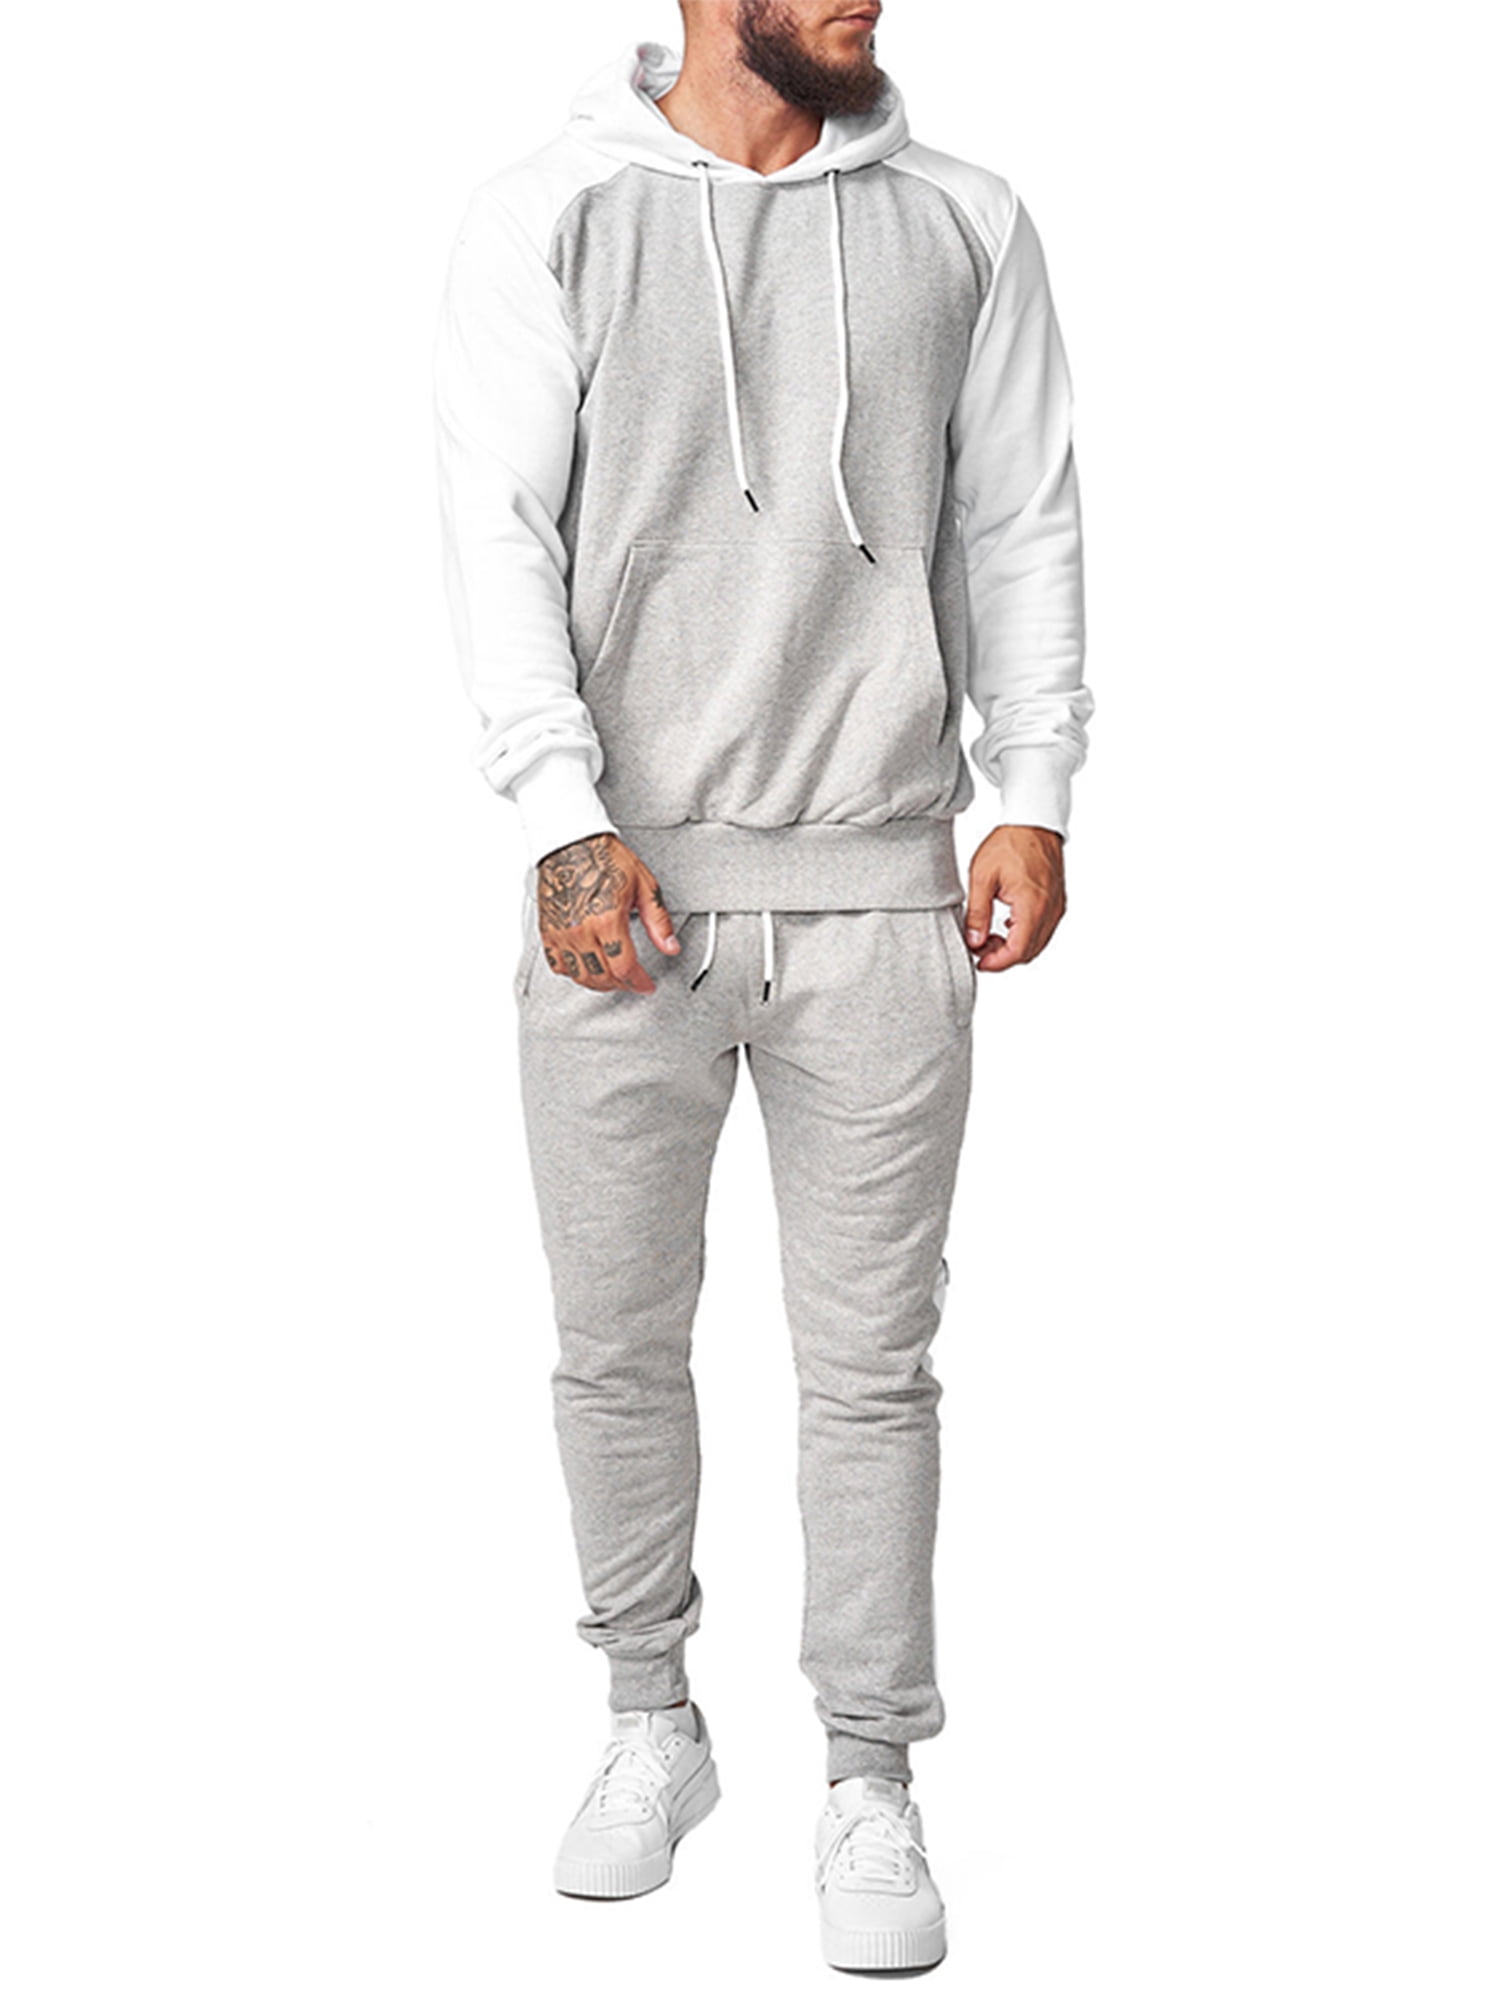 Mens 2Pcs Sweatsuit Hoodie Tracksuit Long Sleeve Hooded Pullover Elastic Sweatpants Casual Jogger Clothes Set 